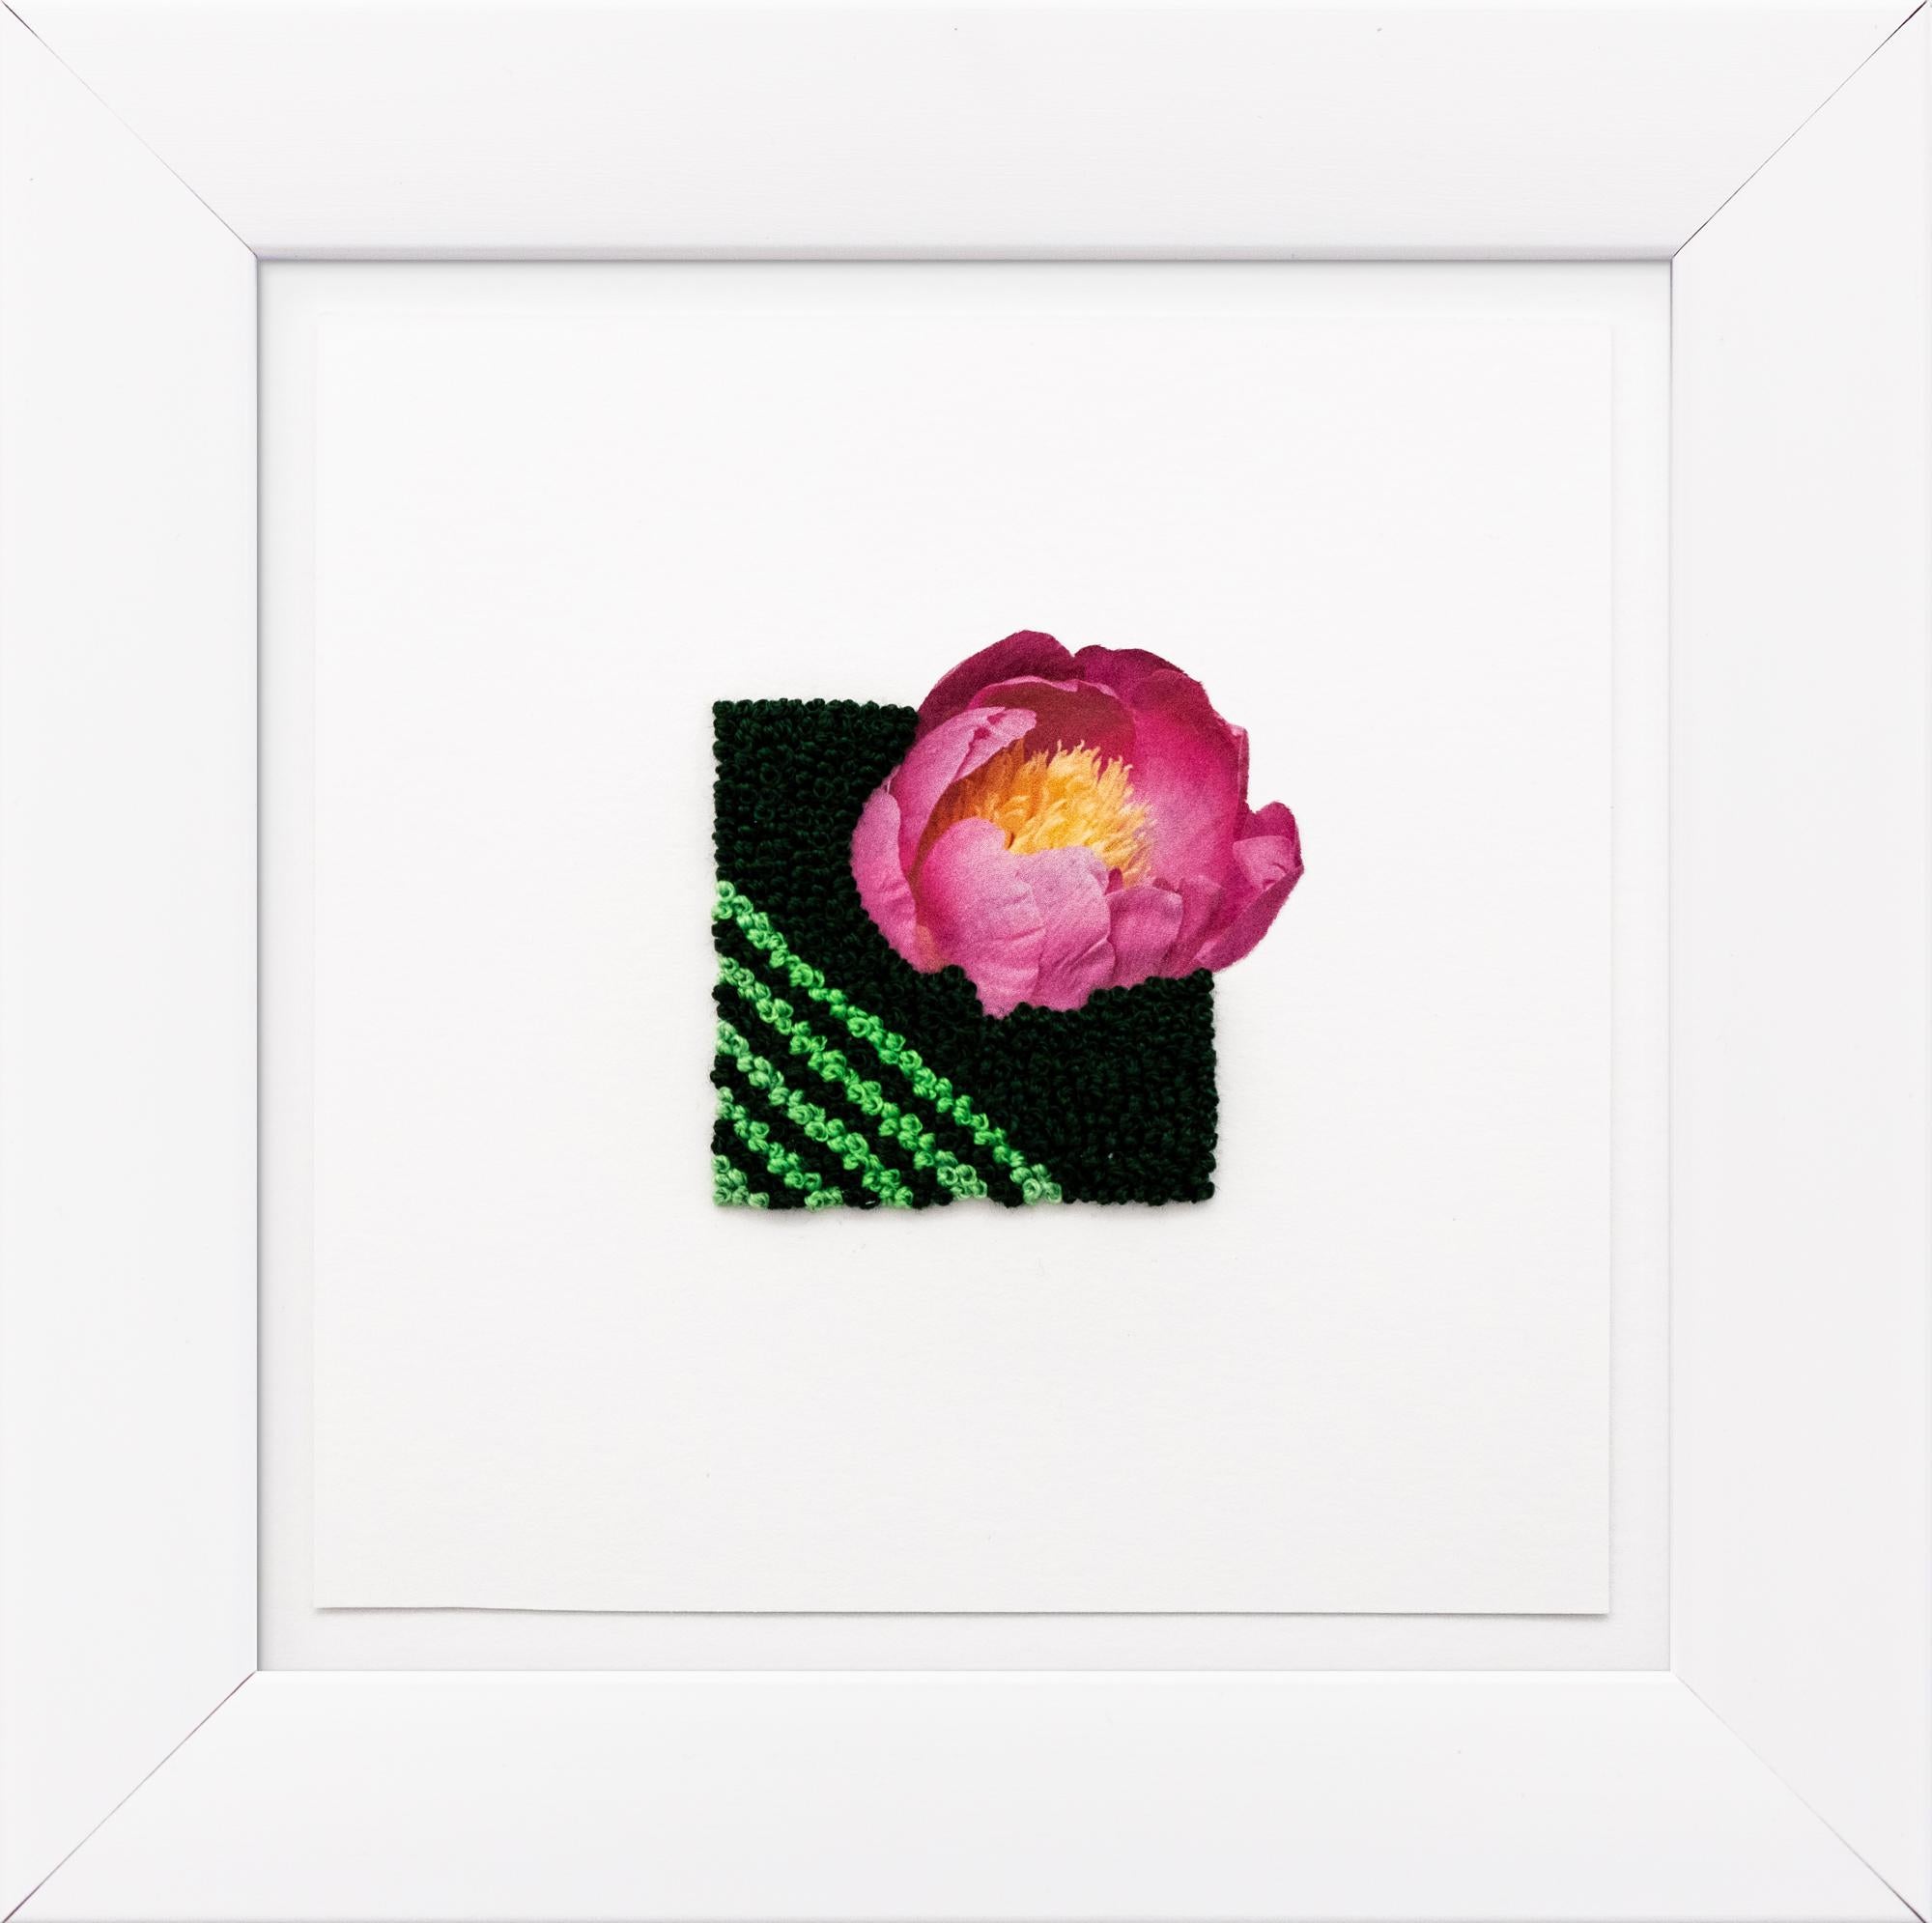 "Award Winning" Floral collage on paper, hand-embroidery, fibers, graphic